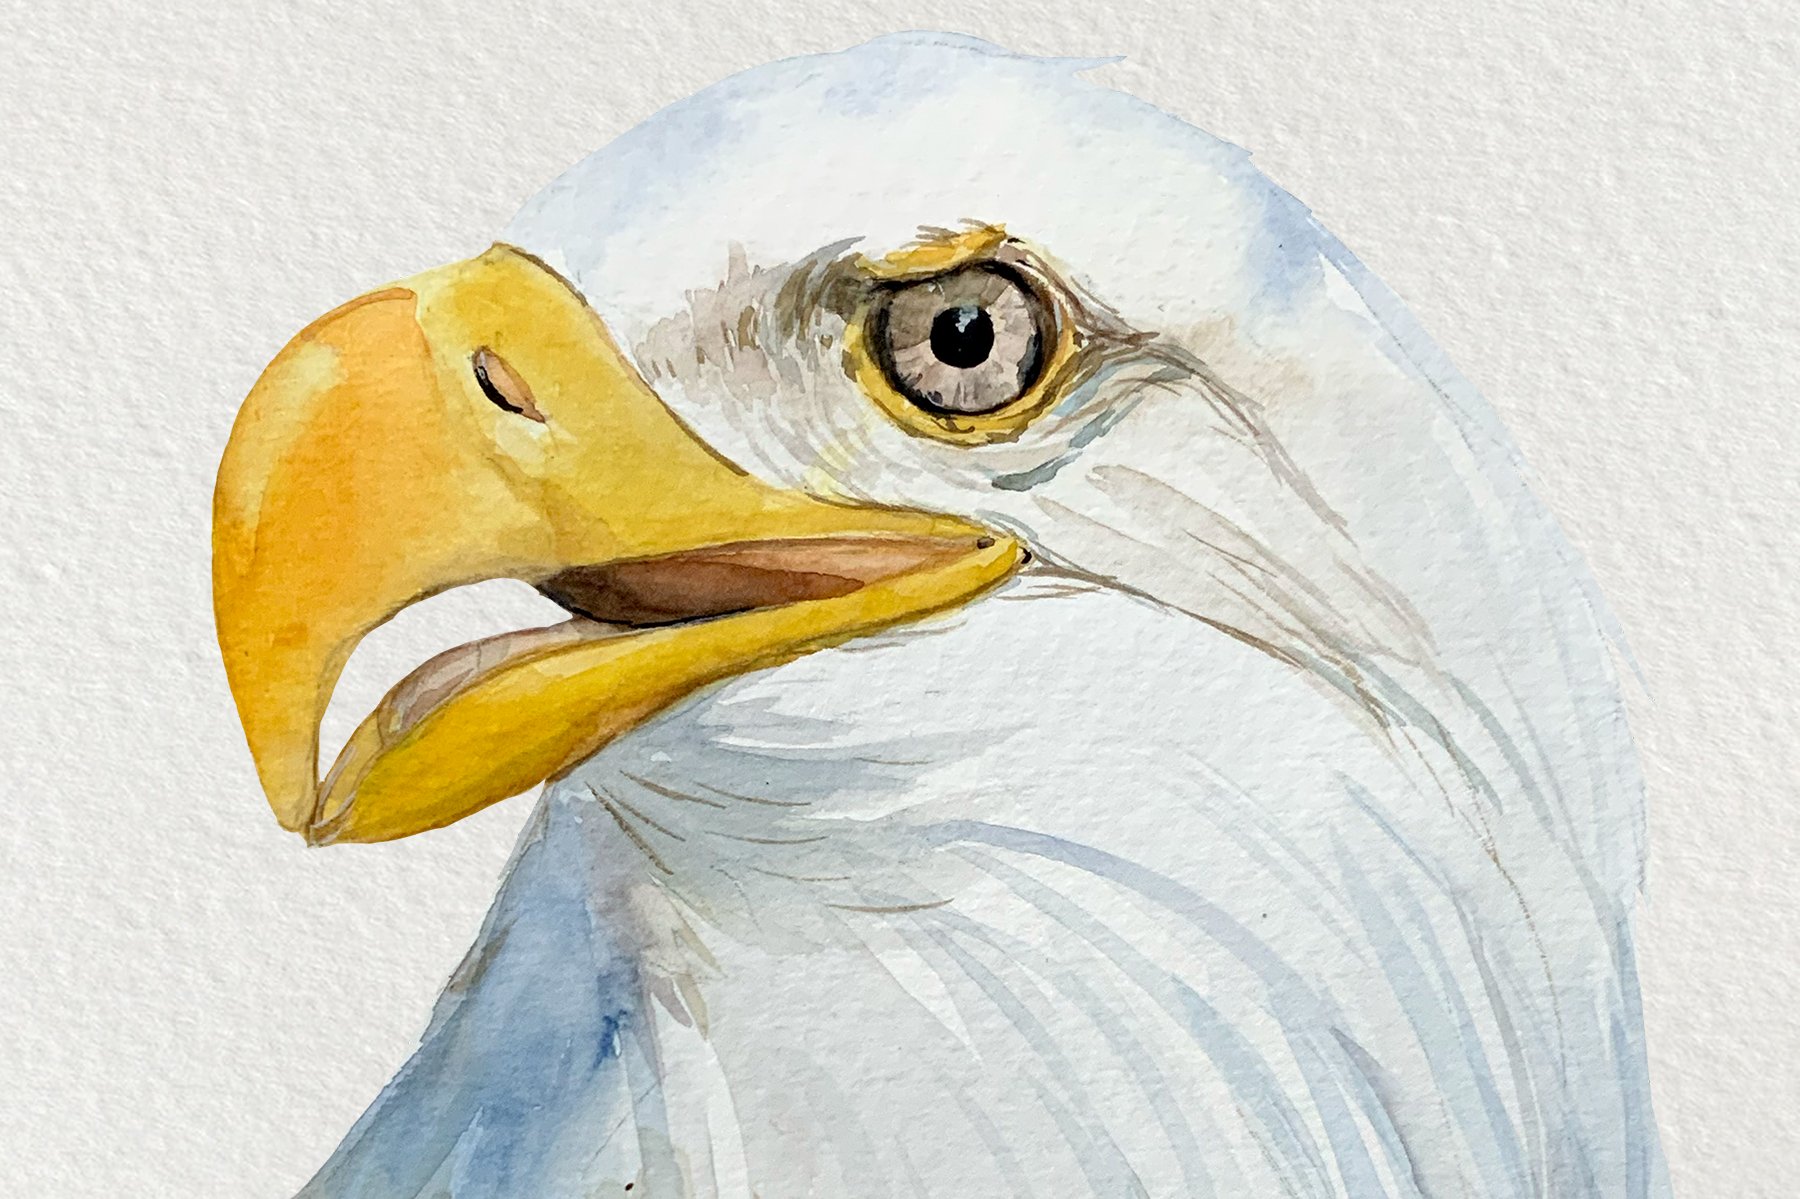 Preview picture of an eagle close up.